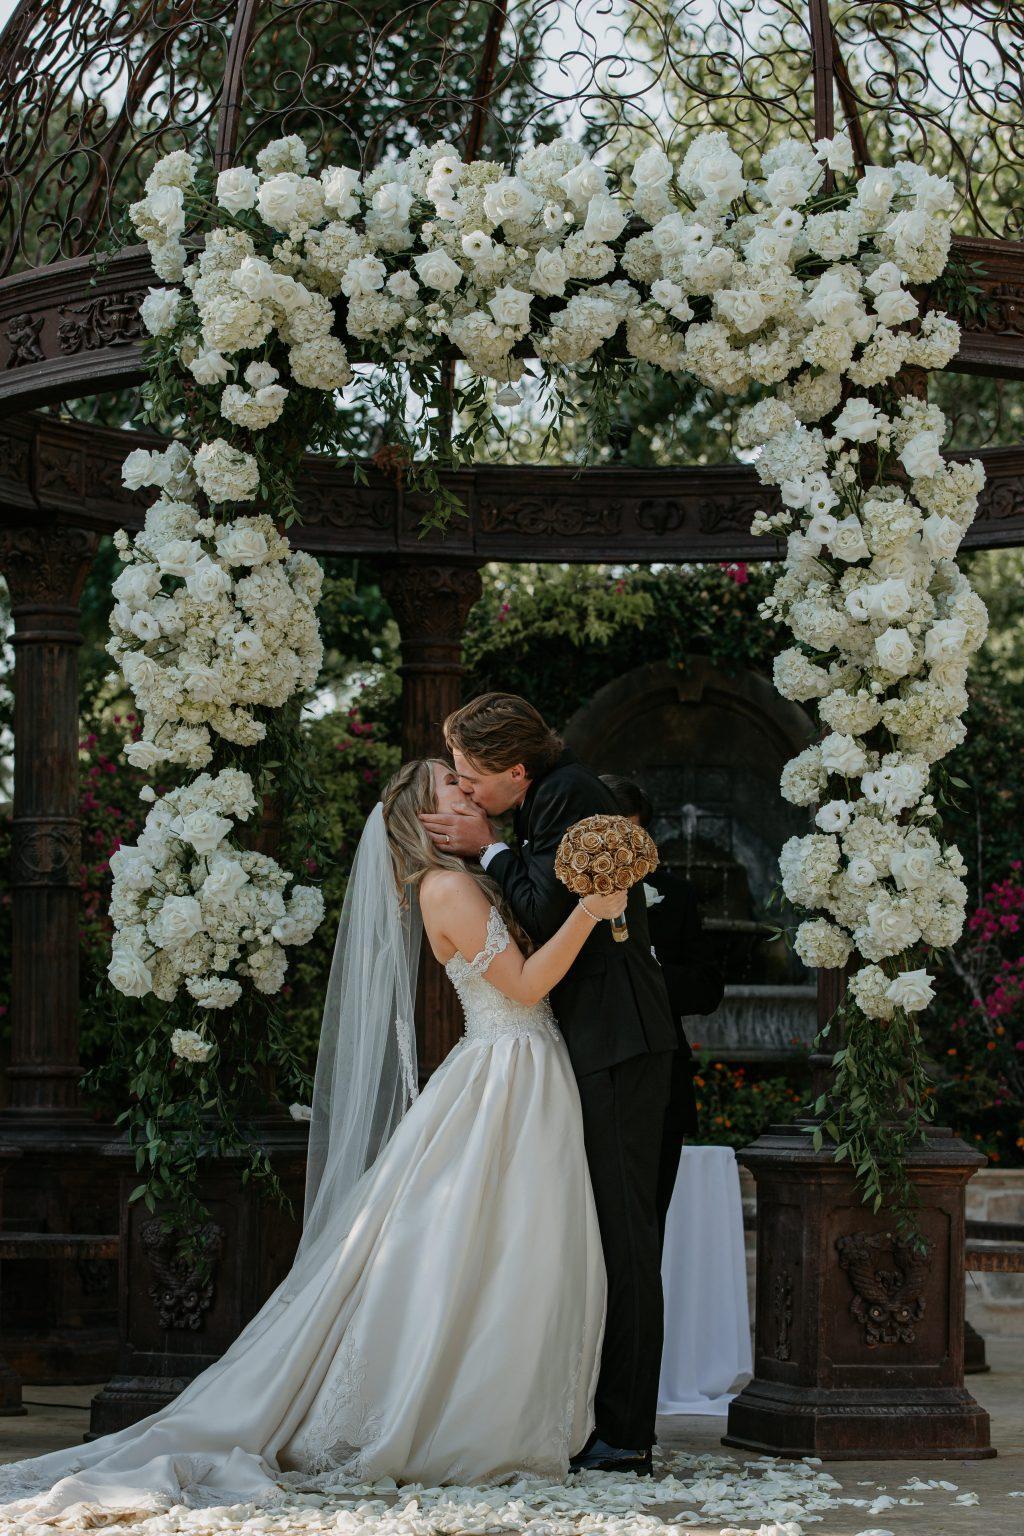 Maya and Hunter kiss for the first time as a married couple. They got married in Westlake Village, Calif., in July 2021.